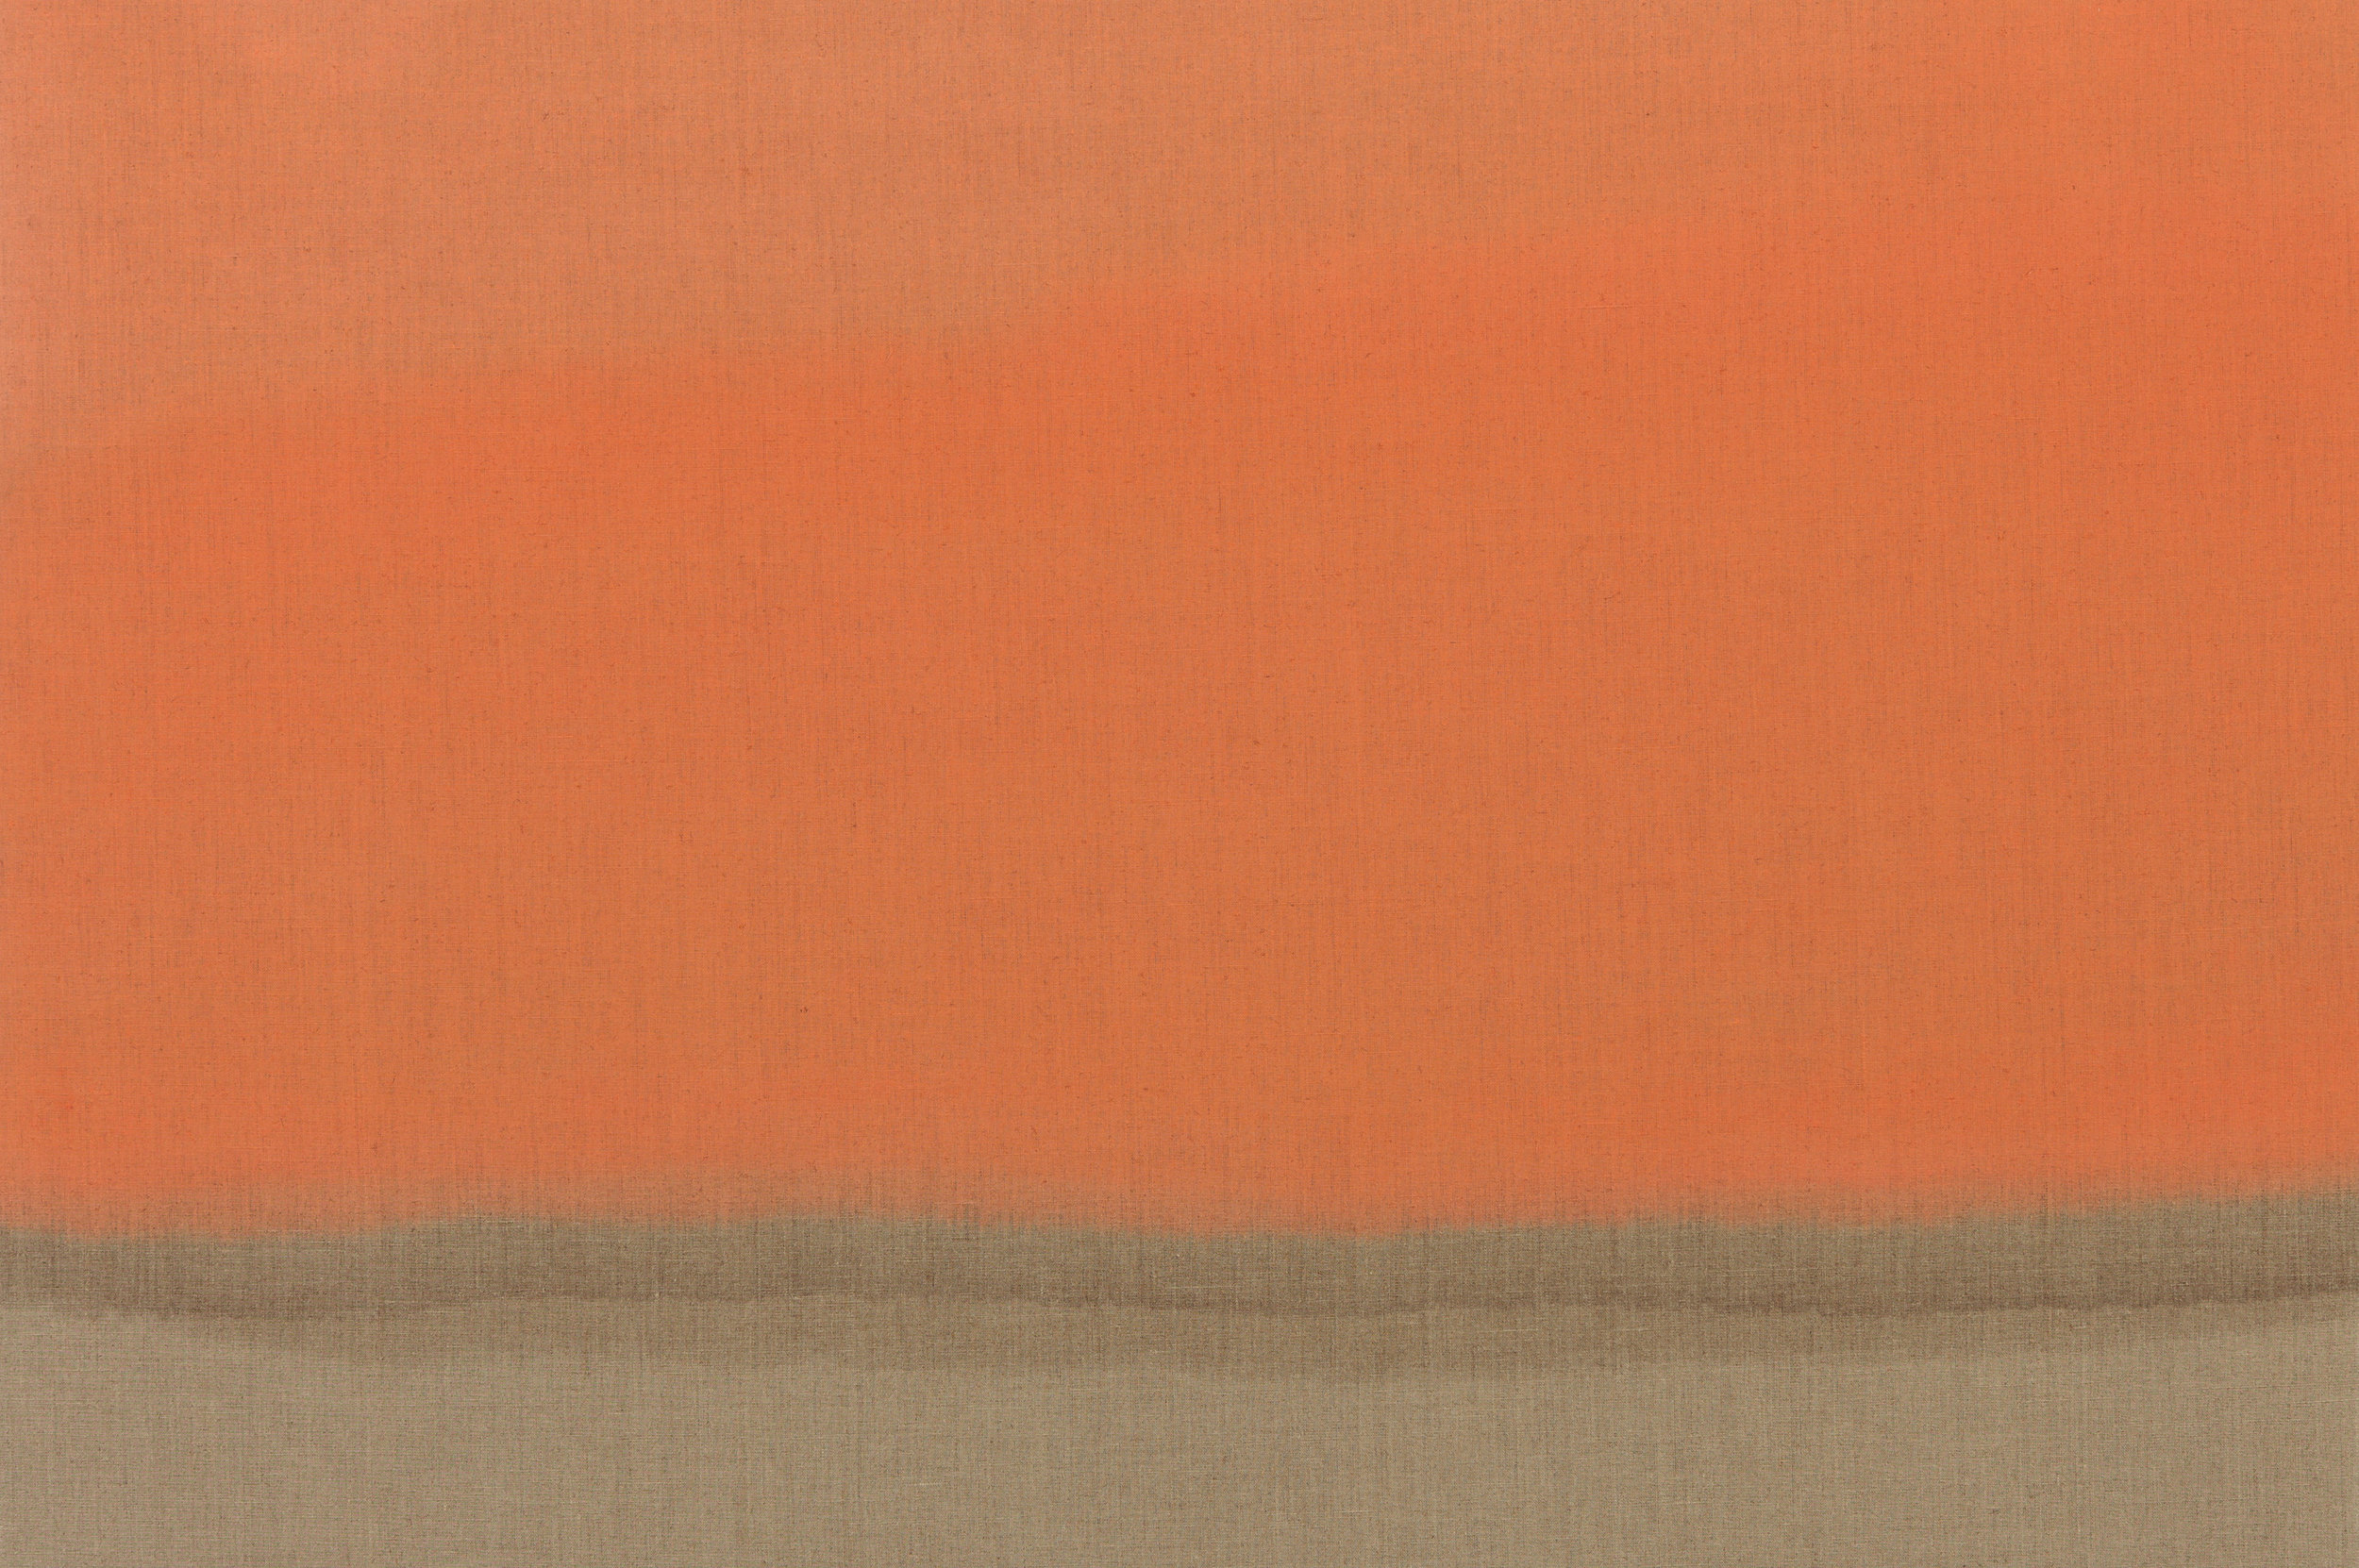  Untitled (Atomic Tangerine), 2014.  Oil on Linen, 36 x 54 inches.  Private Collection. 